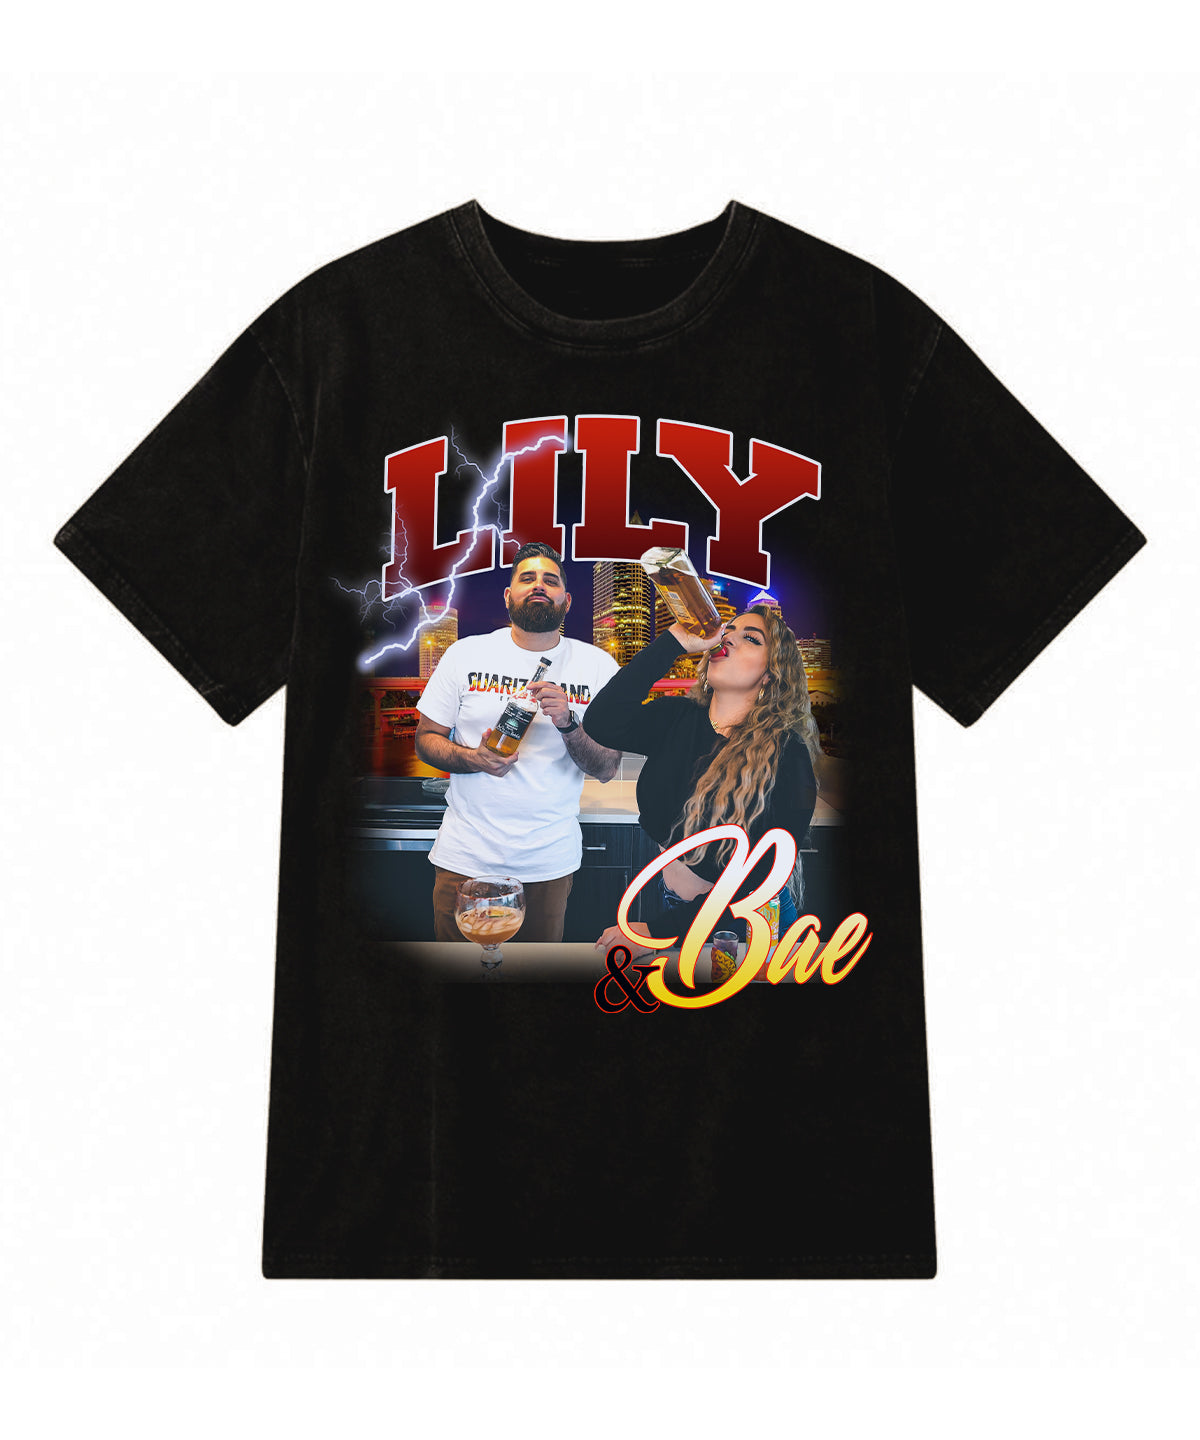 Lily and BAE Vintage T-Shirt in